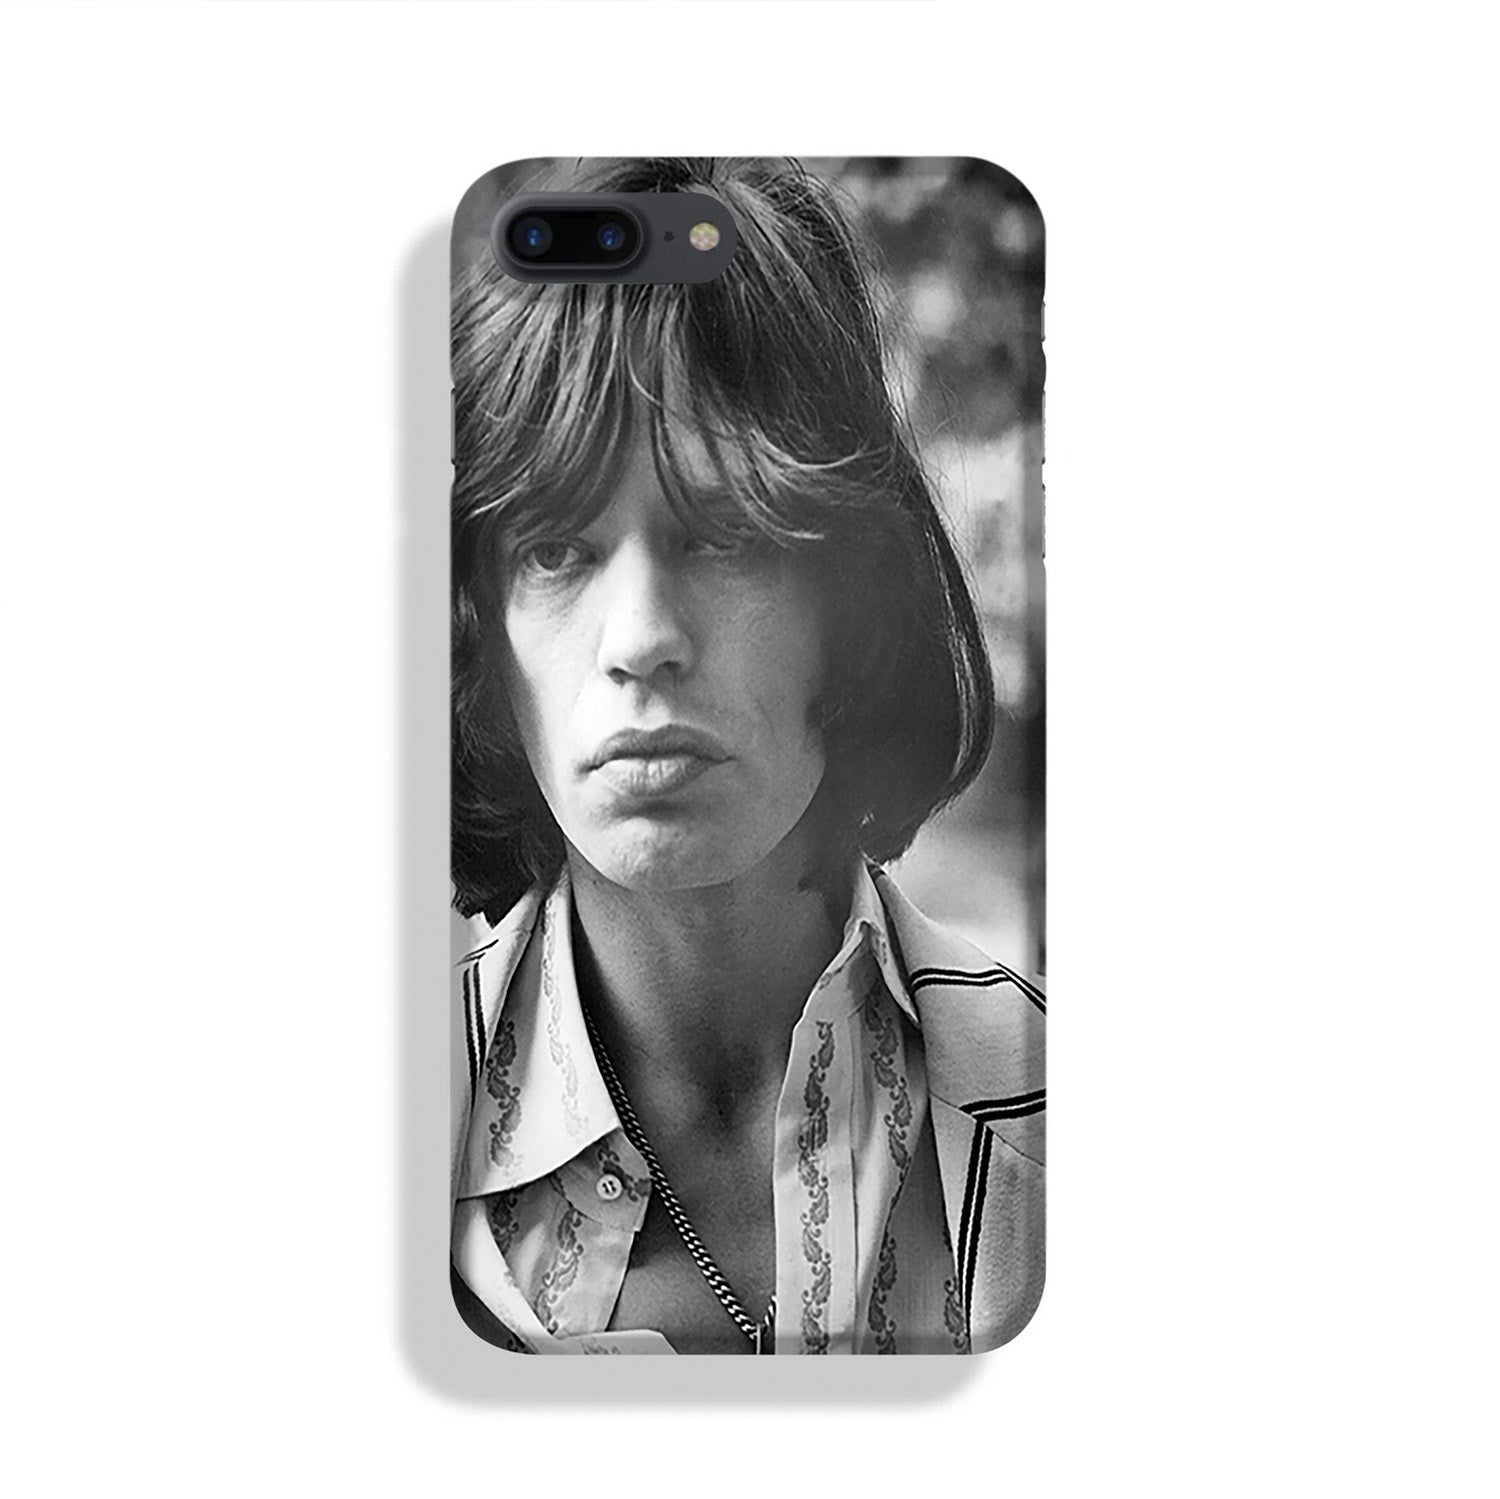 Mick Jagger in 1969 Phone Case iPhone 7/8 Max